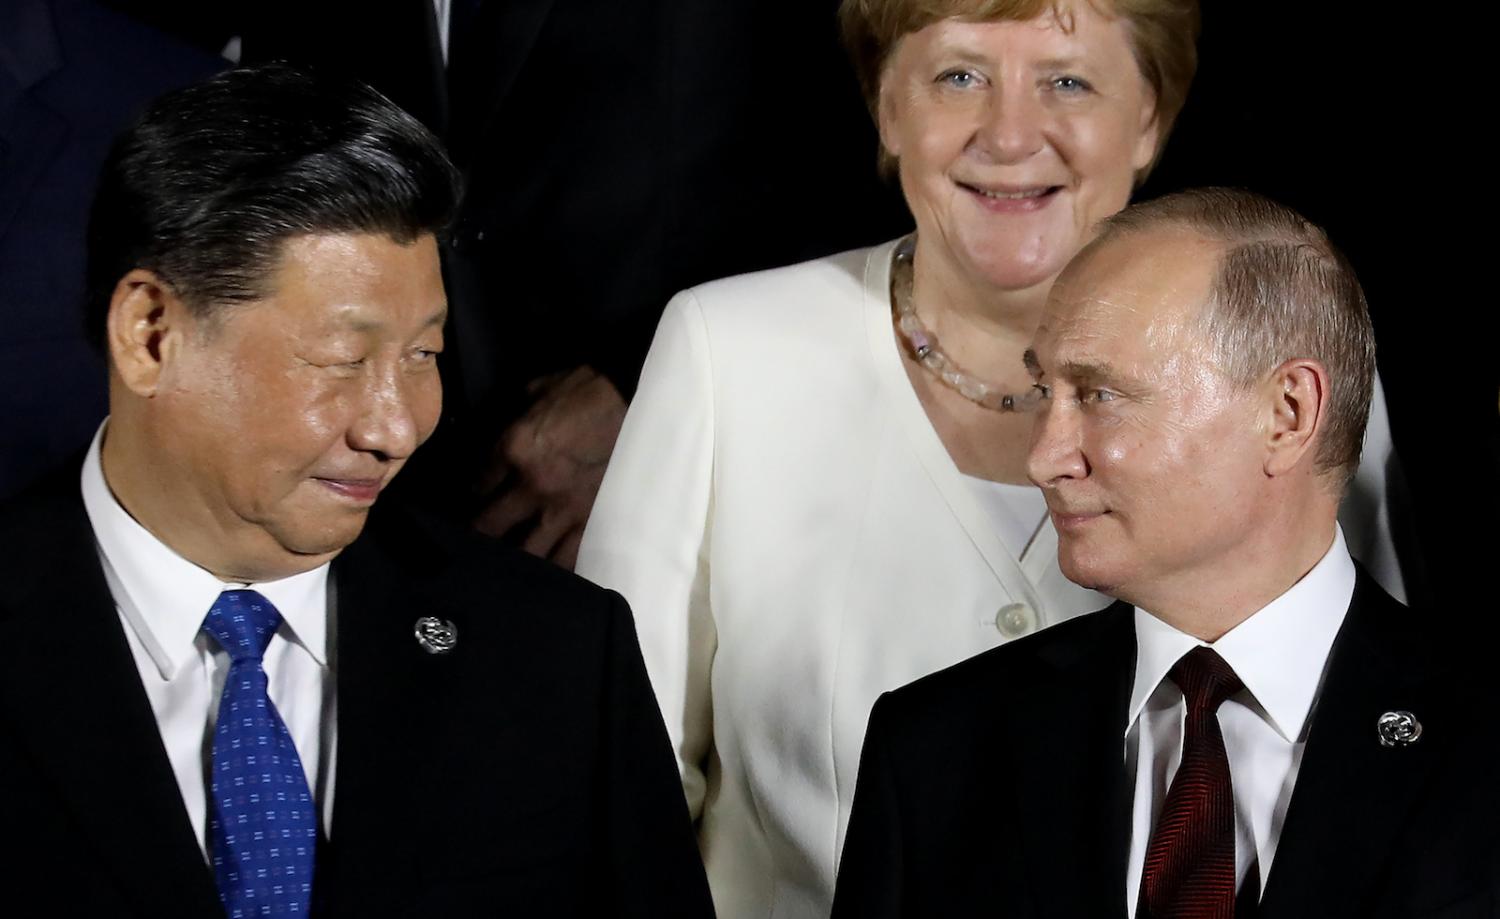 Chinese President Xi Jinping (L) and Russian President Vladimir Putin (R) at the G20 Summit in Osaka, Japan, June 2019 (Photo: Dominique Jacovides/AFP/Getty)